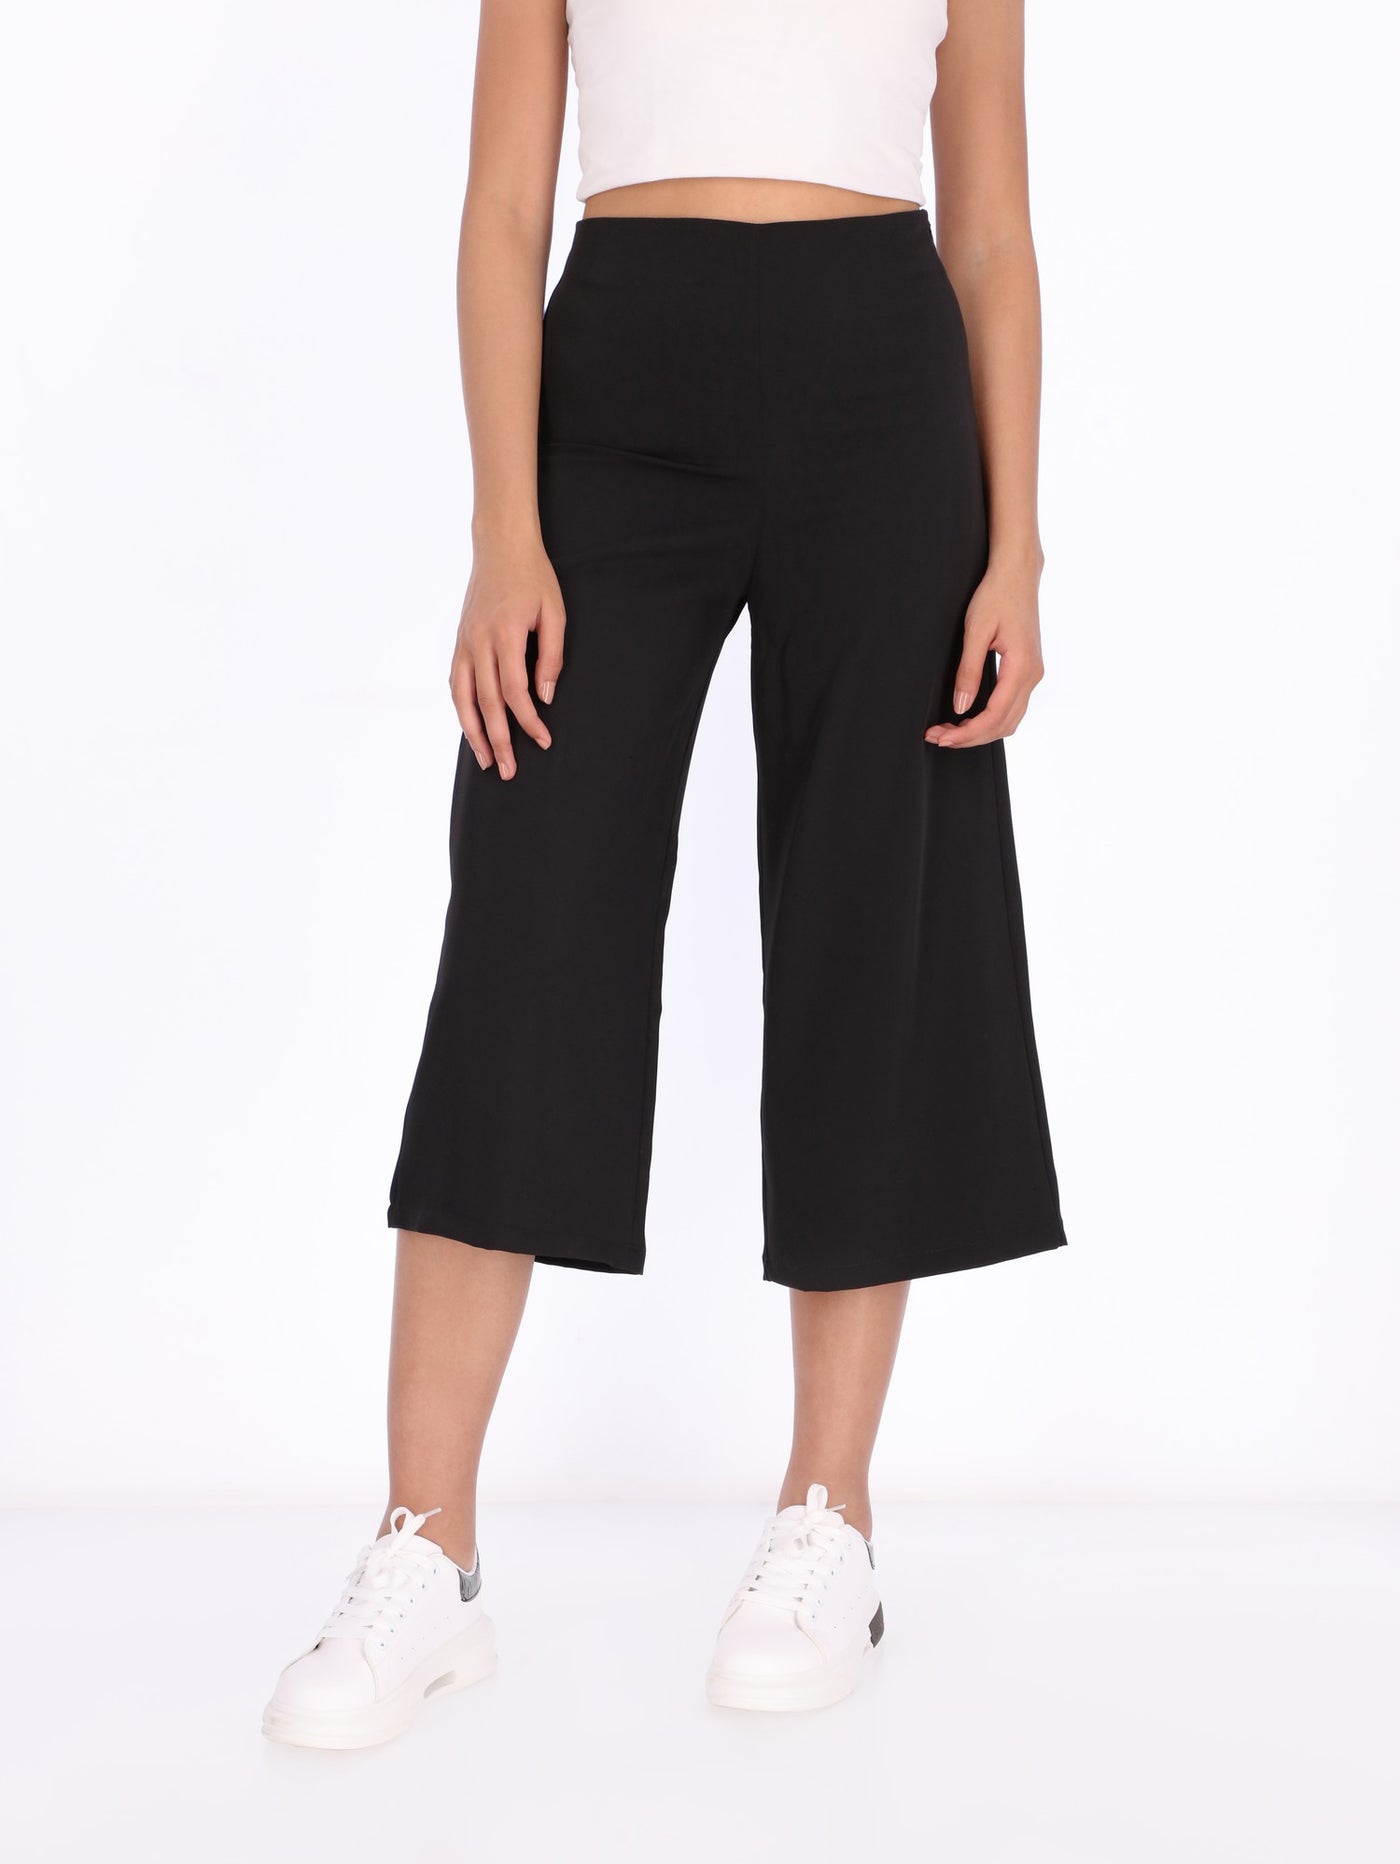  OR Women's Basic Culottes